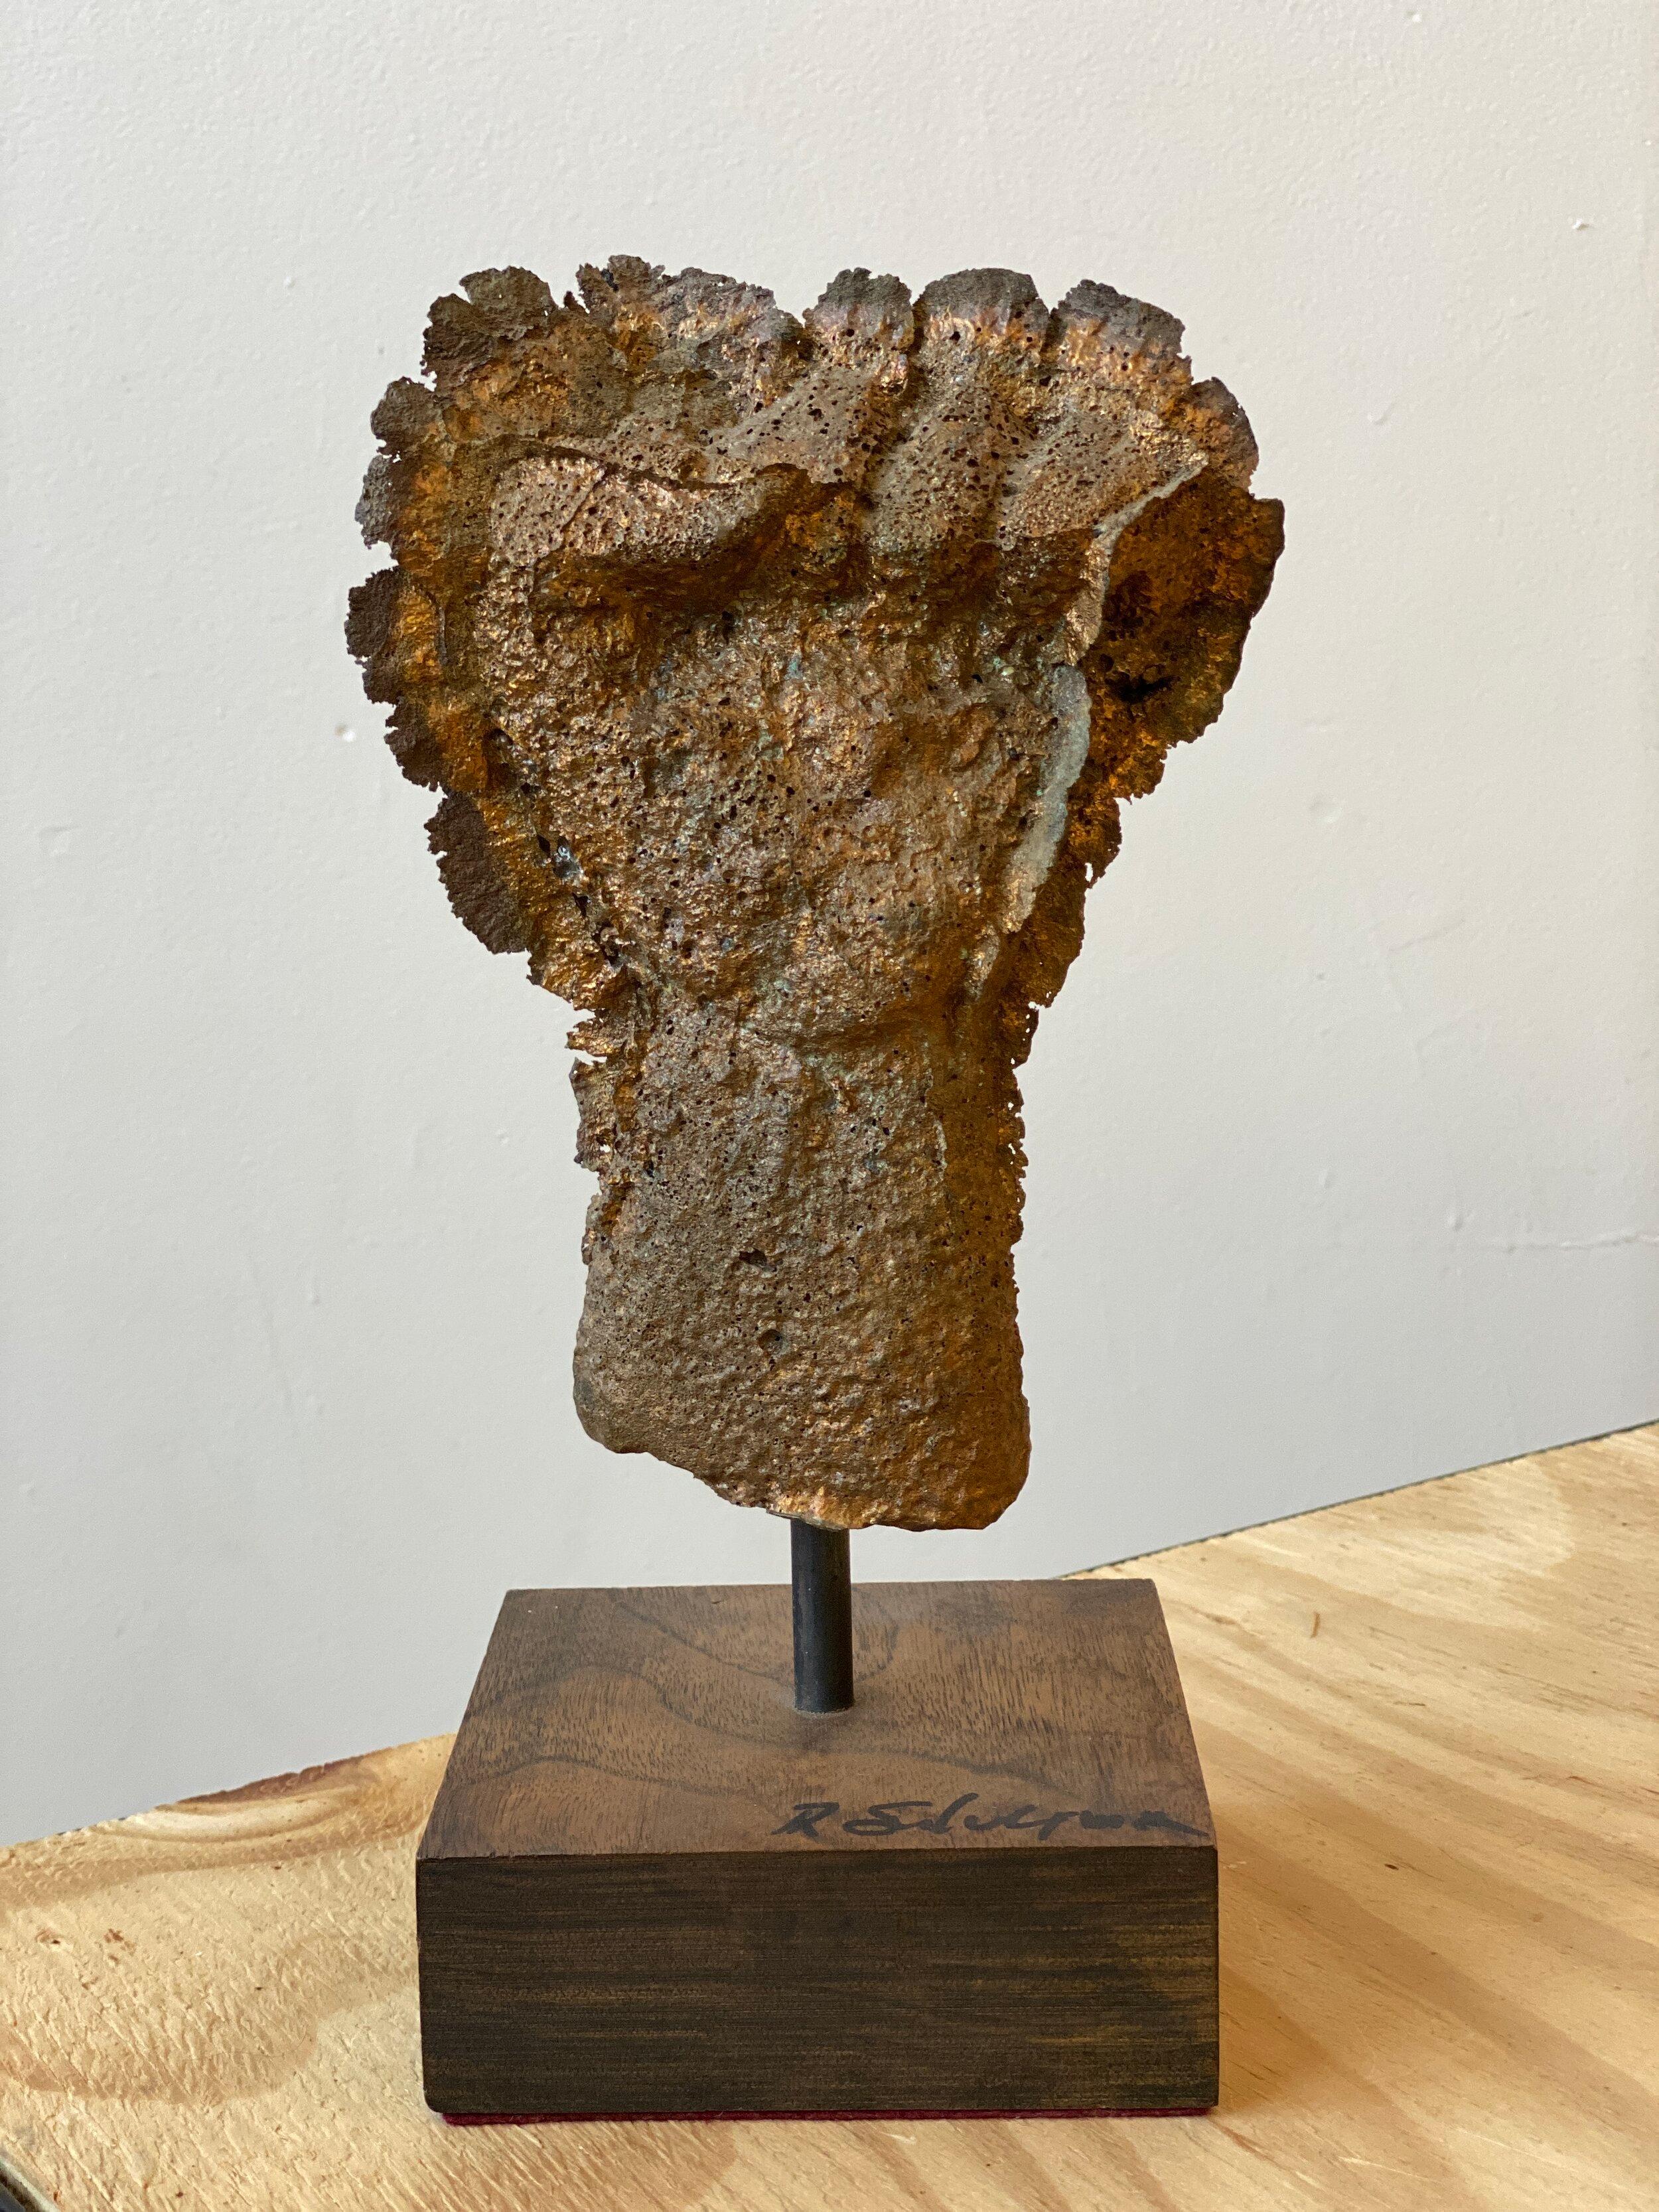 Vintage cast bronze fist sculpture on wood base, Signed R Silverman, circa 1980s. Rough cast bronze in the form of a closed fist. Often seen as the symbol of political solidarity, a raised fist is used as a salute to express unity, strength, or